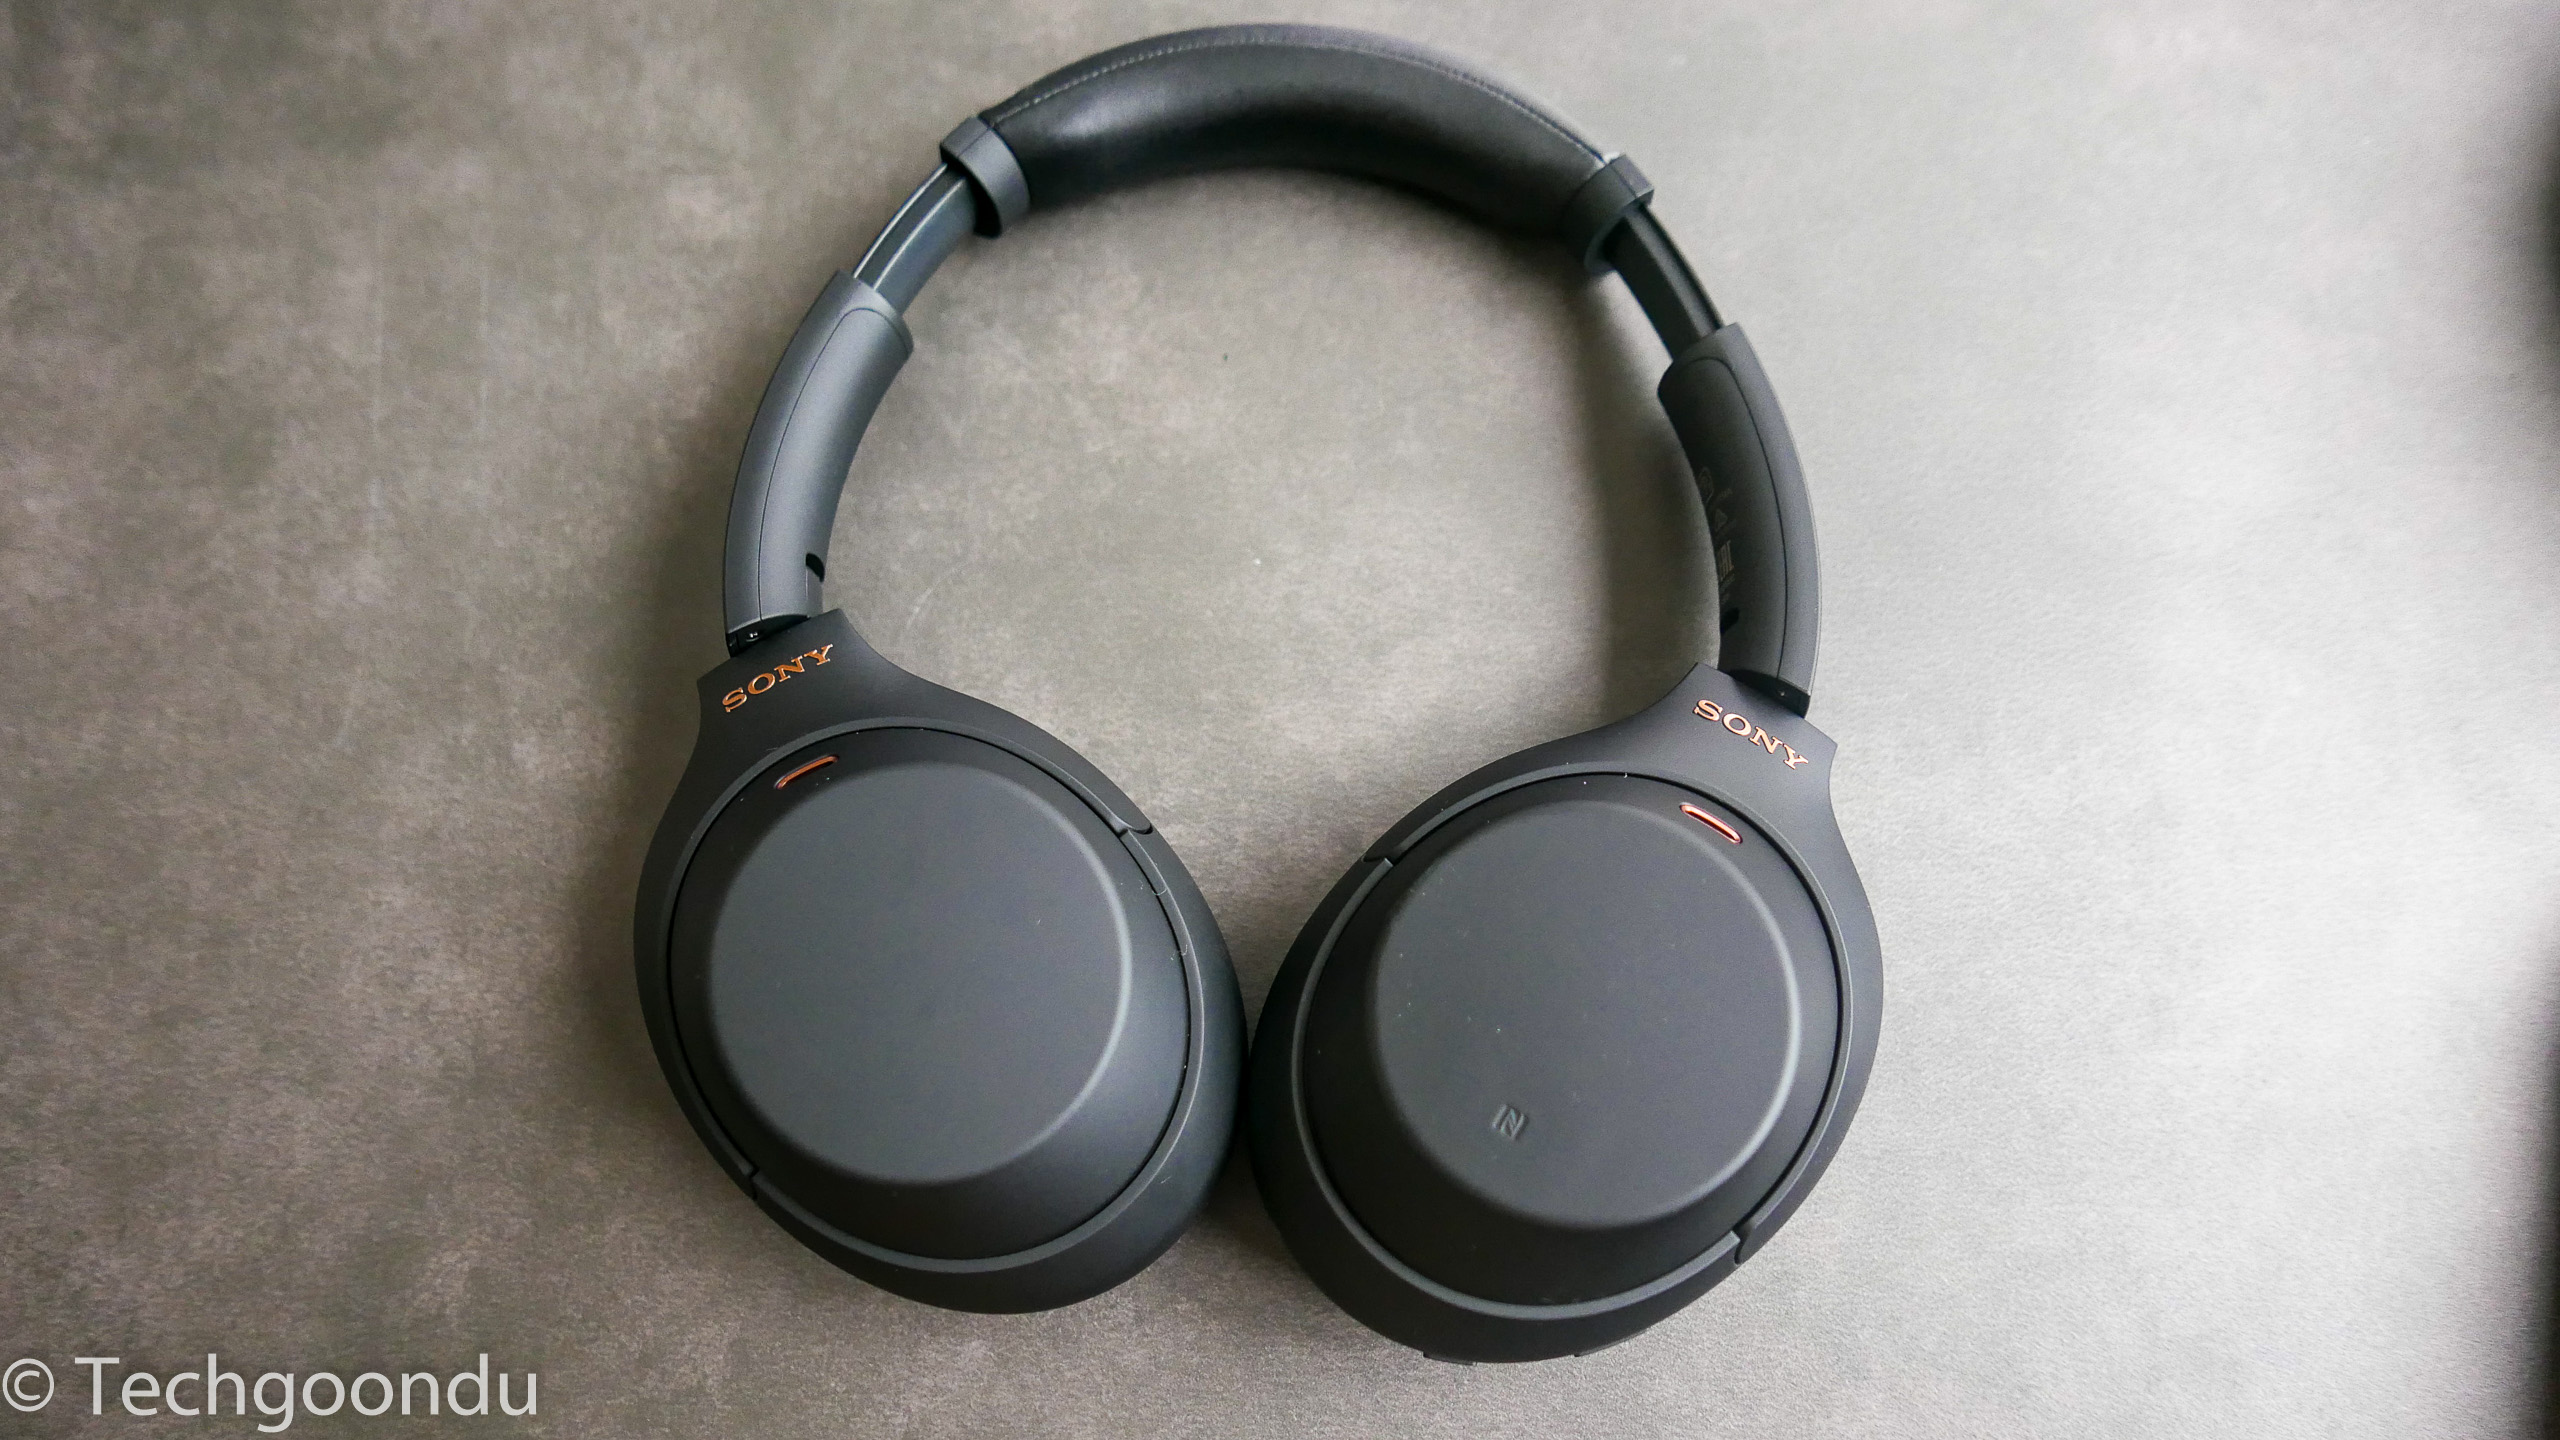 Goondu review: Sony WH-1000XM4 are the noise cancelling headphones to ...